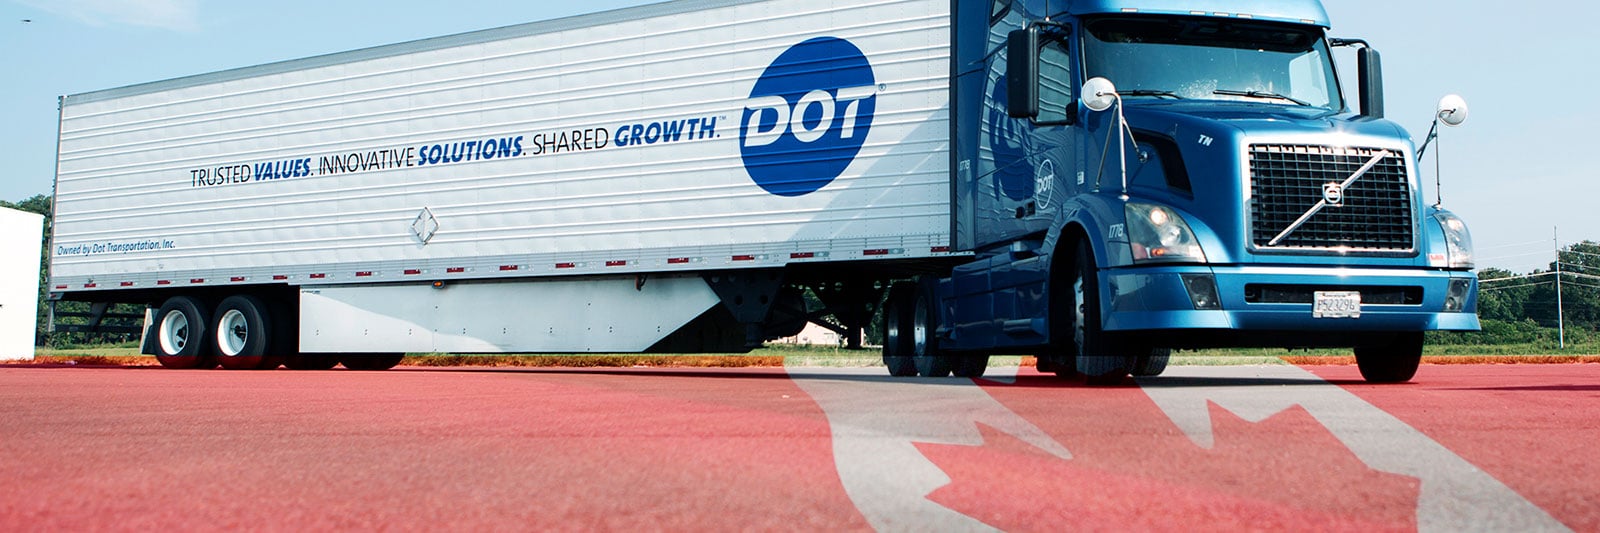 Dot Foods truck with Canadian flag embedded on the road